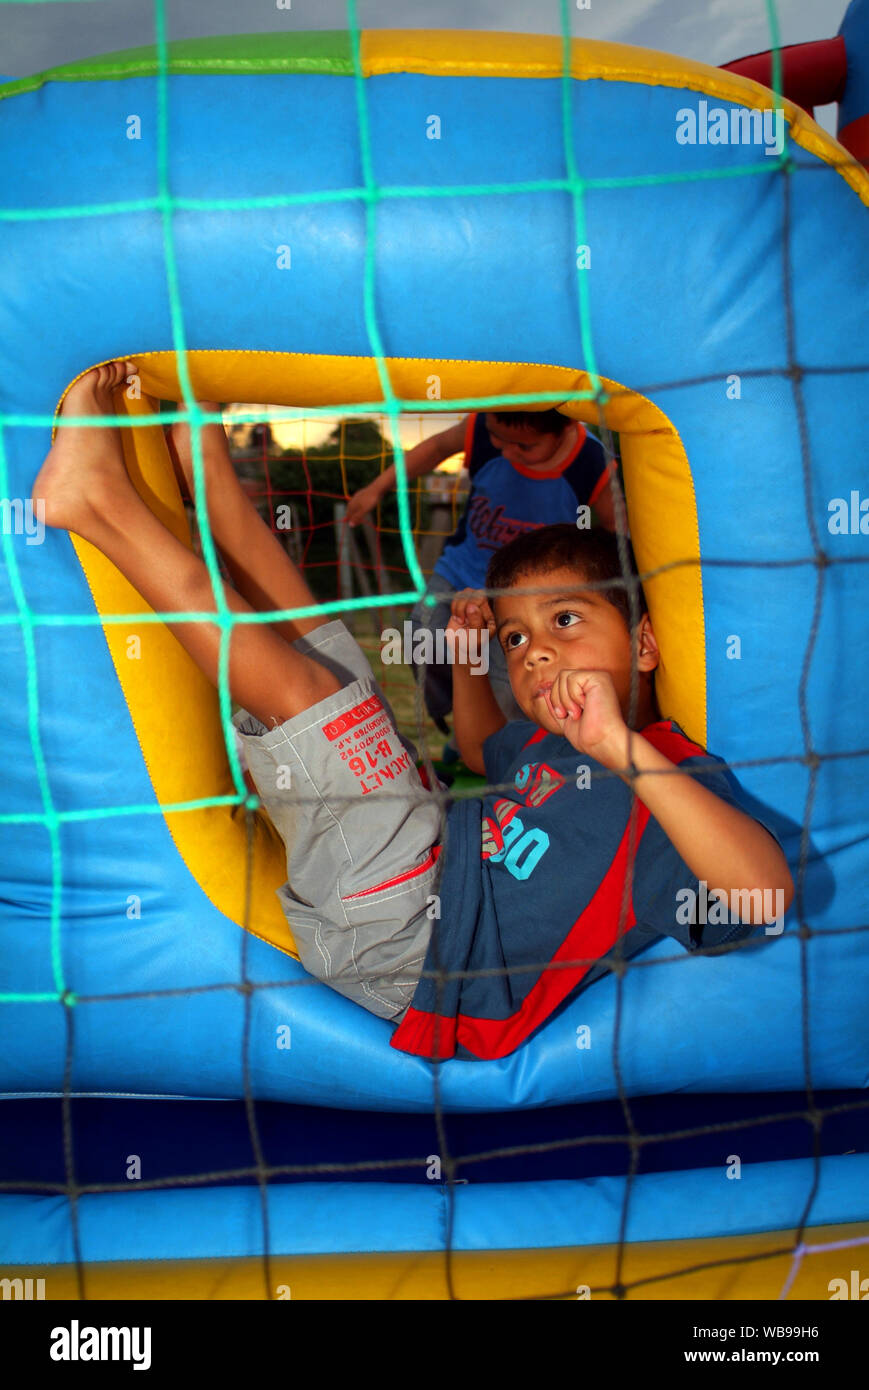 A young boy with a blue and red shirt is seating with his legs upside in the center of a light blue and yellow inflatable game, he look like dreaming Stock Photo